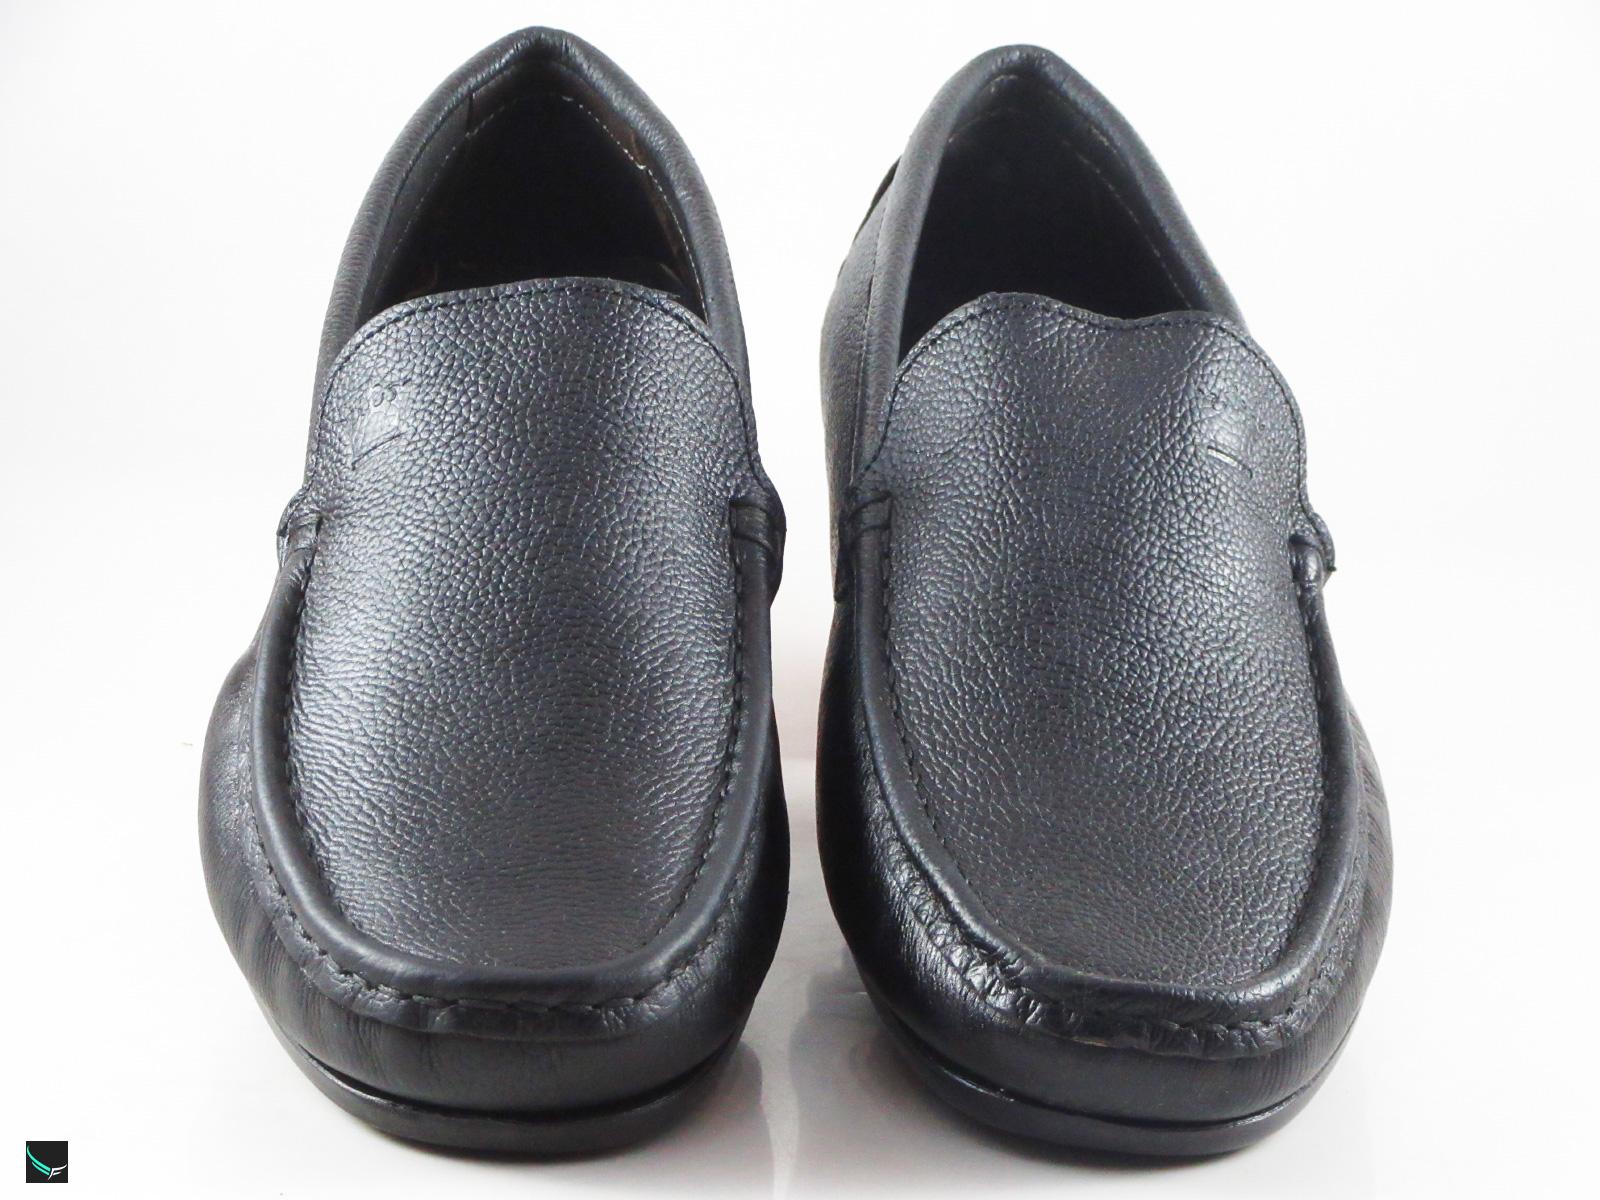 daily wear loafers